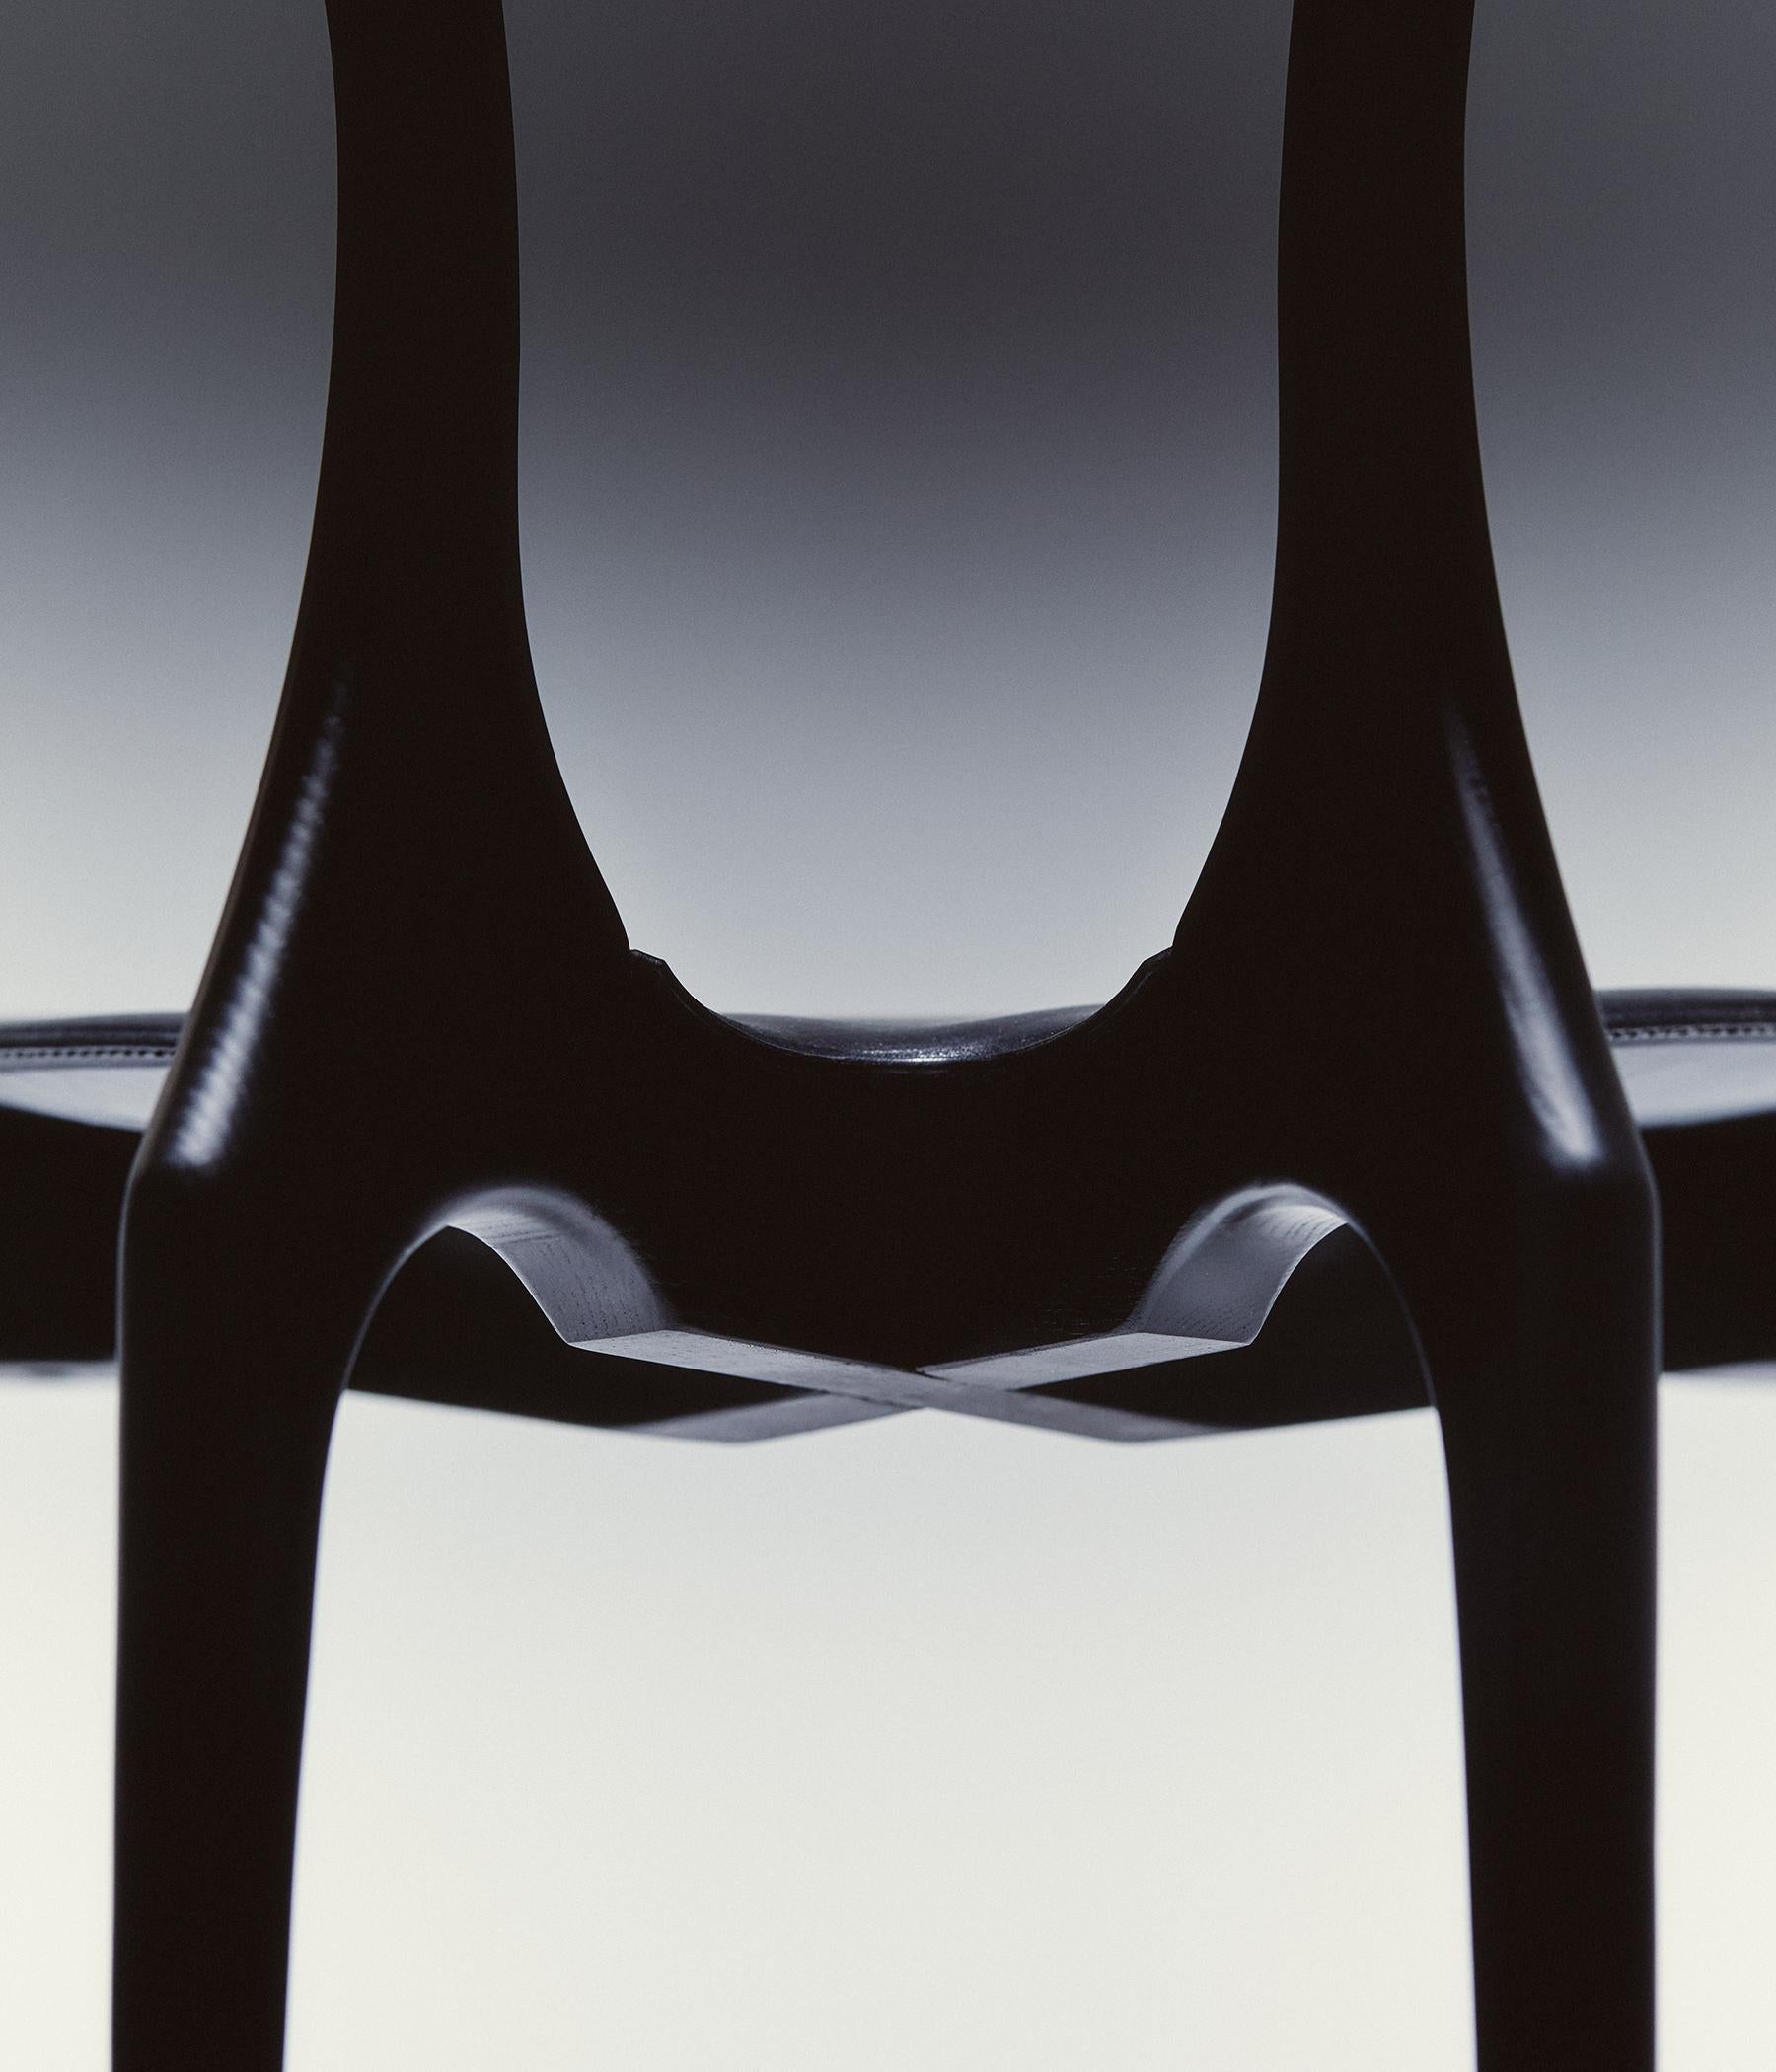 Gaulino chair by Oscar Tusquets ash wood black lacquer leather hide seat, Spain For Sale 7